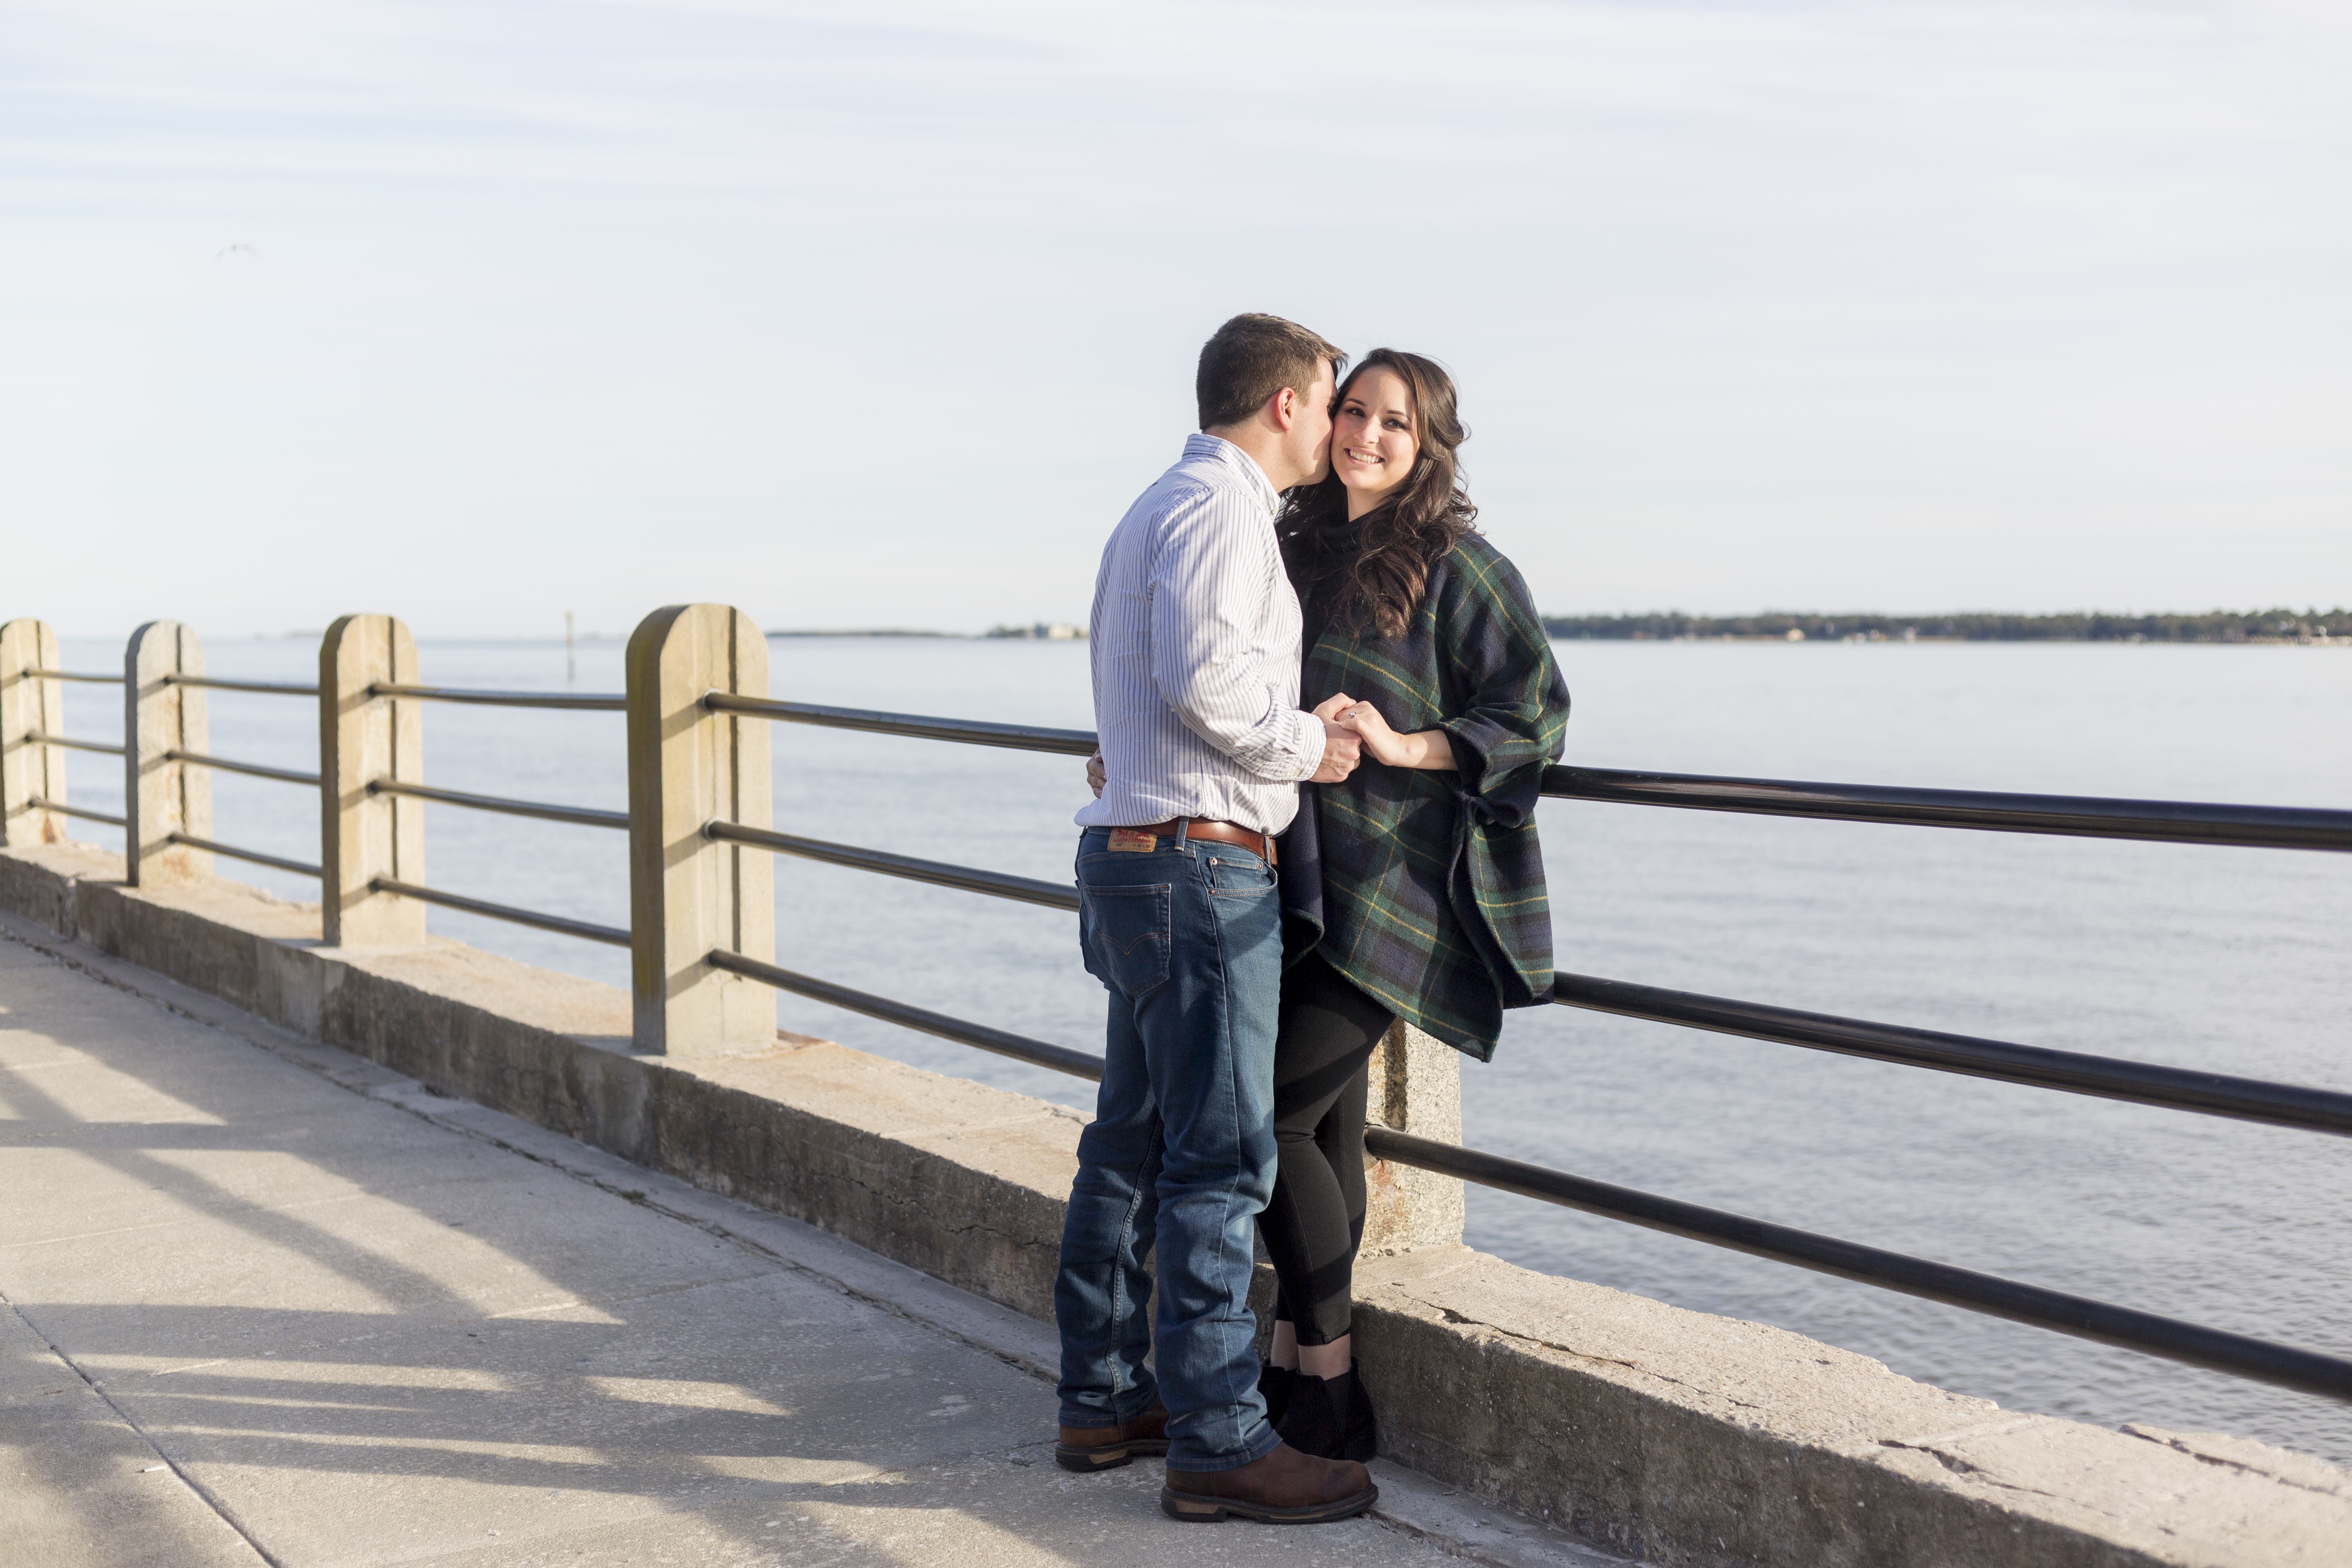 The couple is standing at the waterfront.